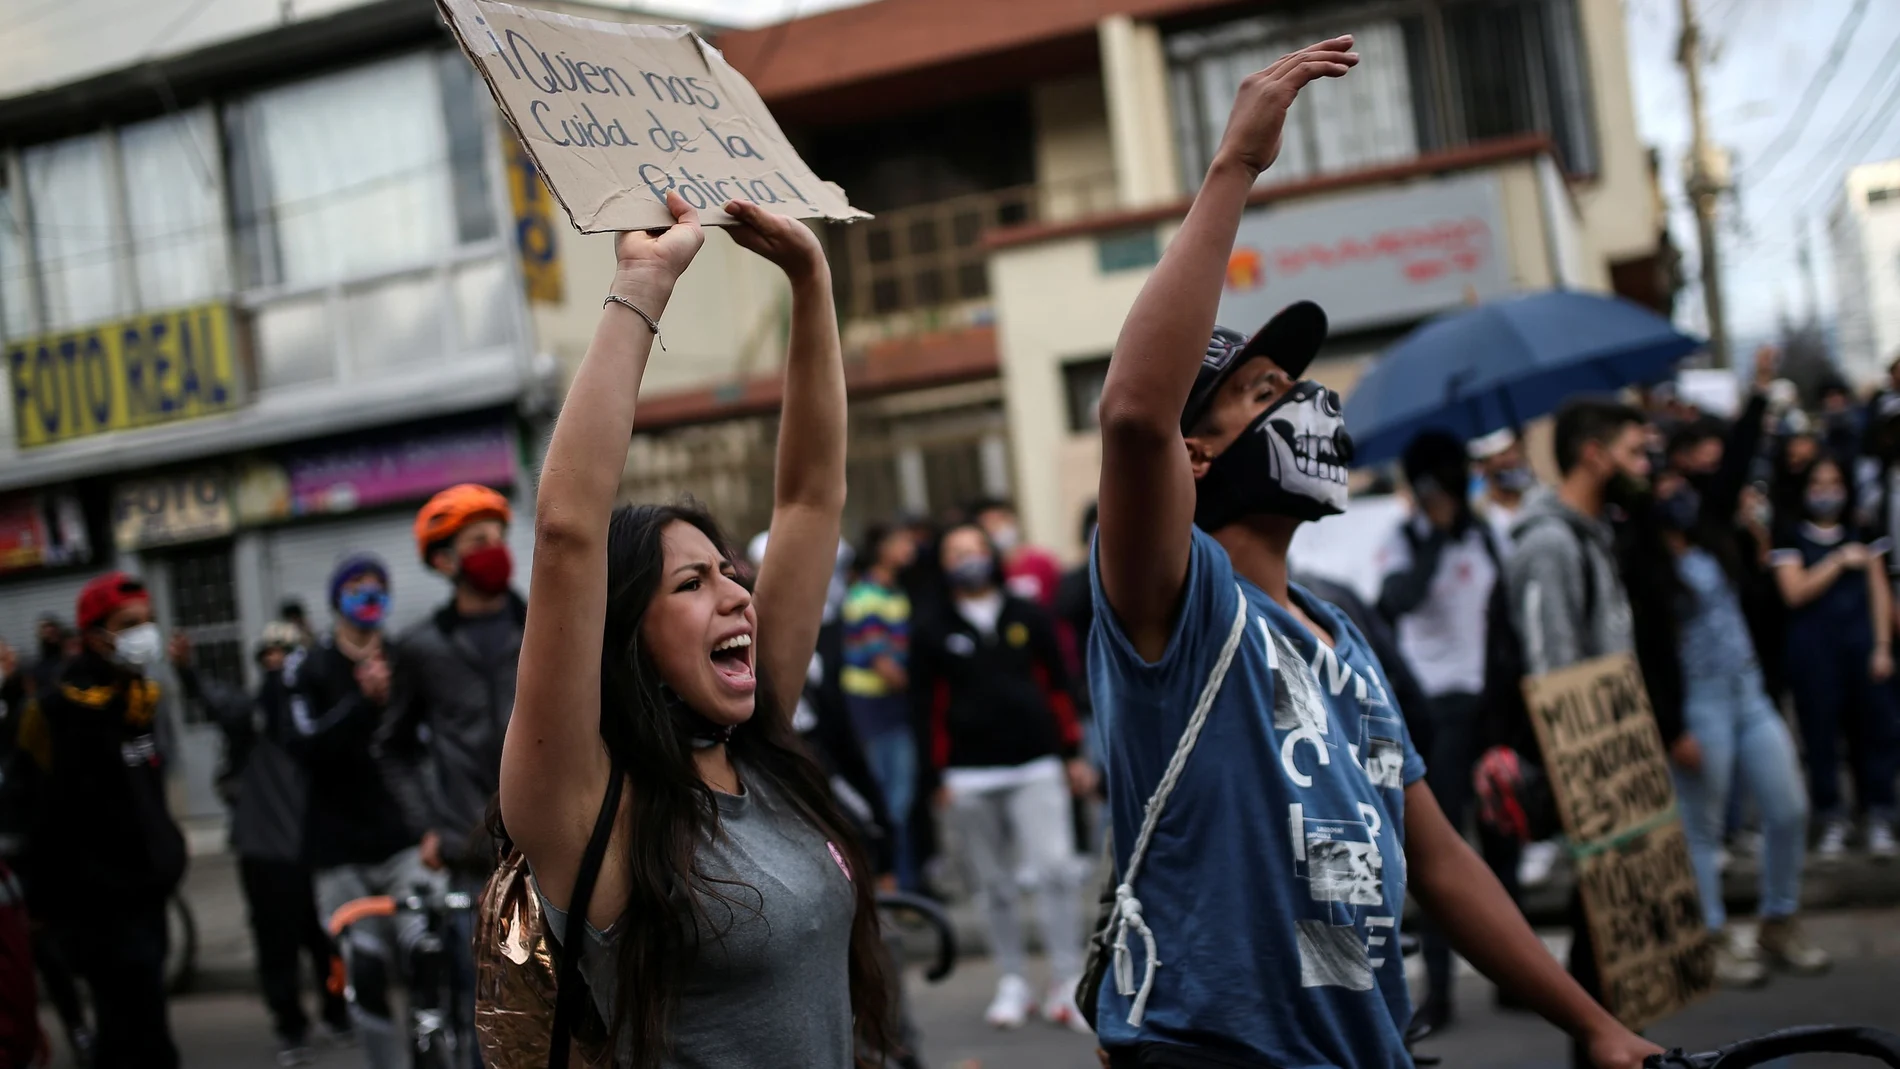 People protest outside a police station after a man, who was detained for violating social distancing rules, died from being repeatedly shocked with a stun gun by officers, according to authorities, in Bogota